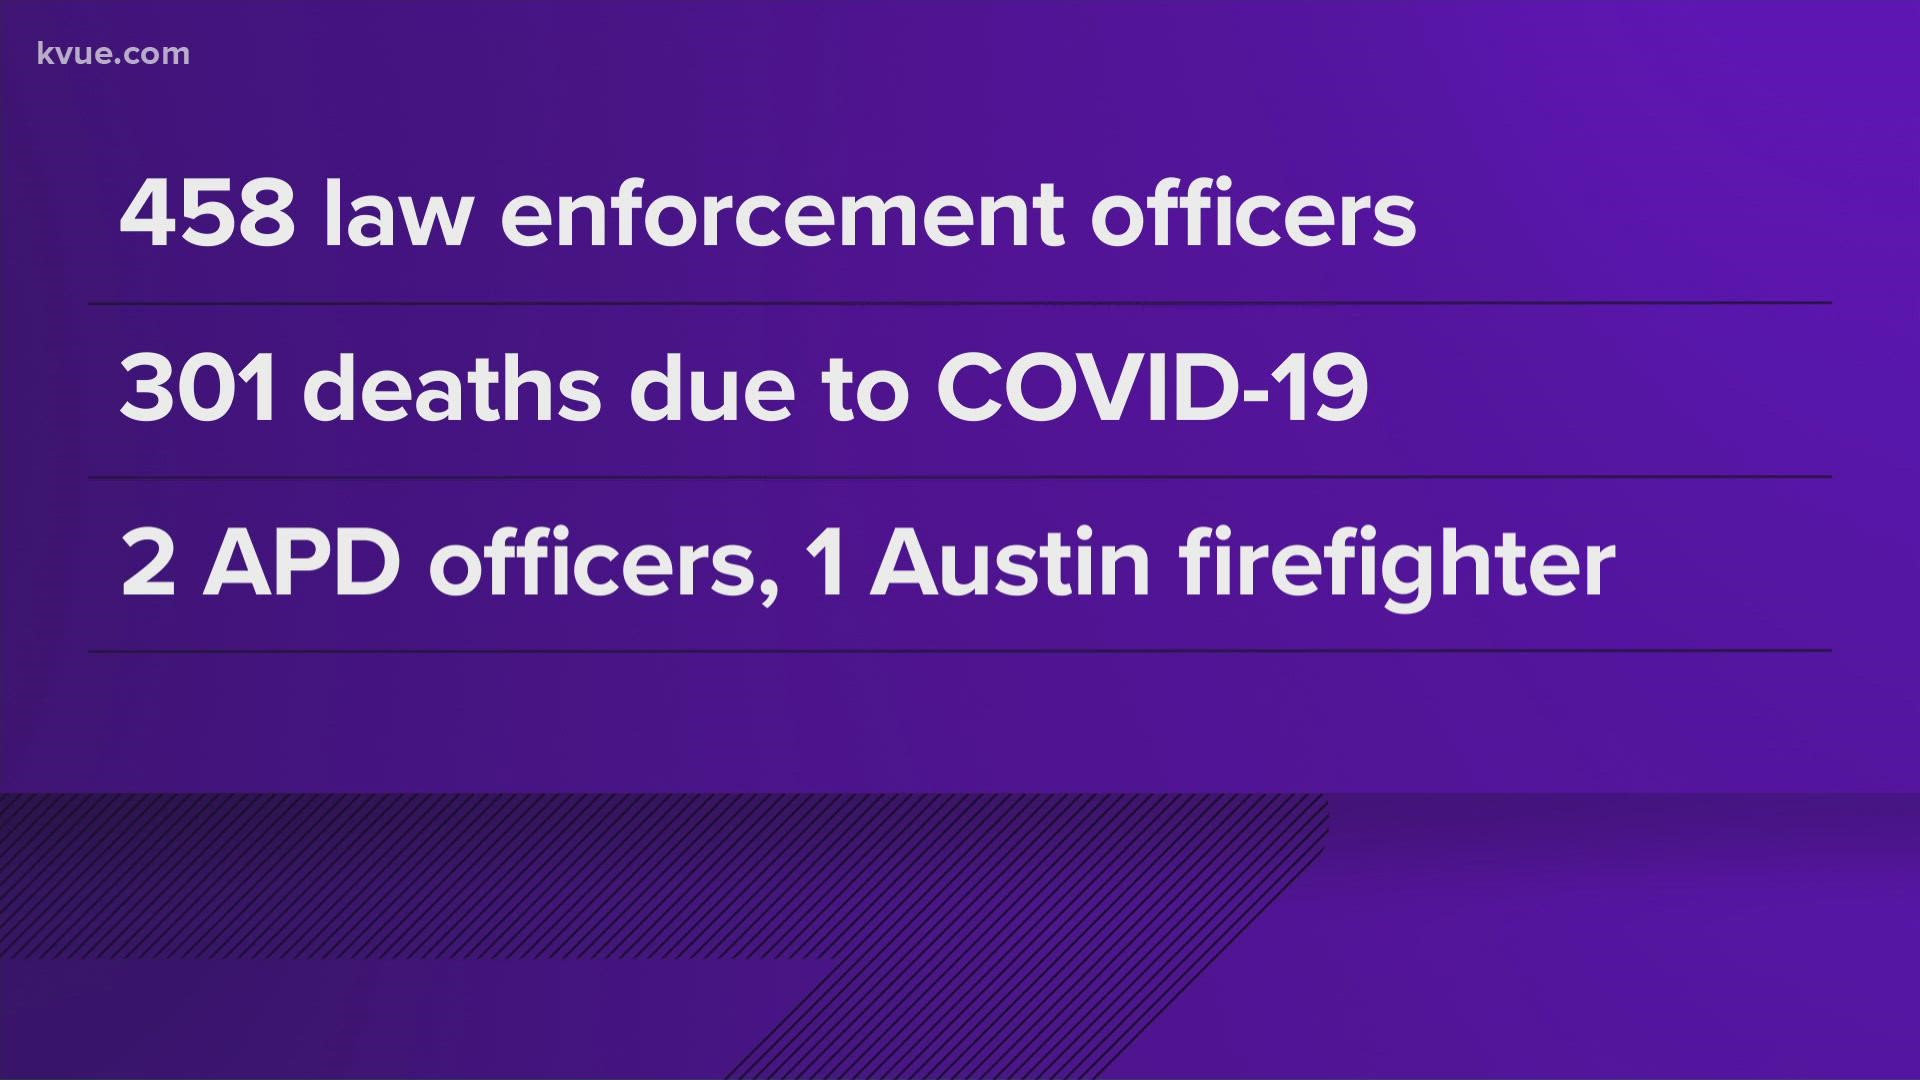 The report from the National Law Enforcement Memorial Fund said a total of 458 local, state, tribal and federal officers died.